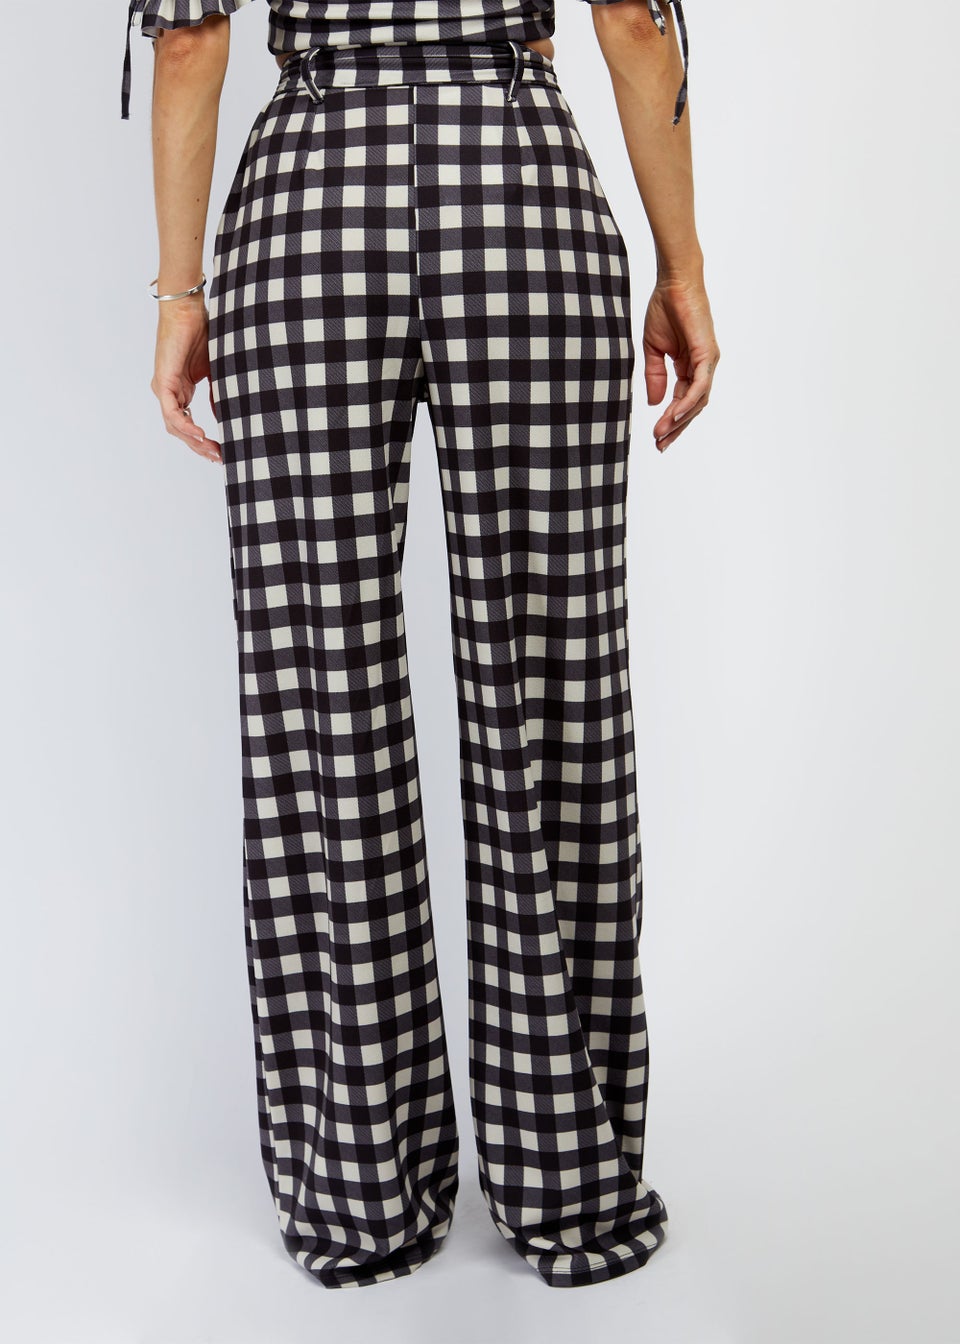 Girls on Film by Dani Dyer Black Gingham Co-Ord Trousers - Matalan